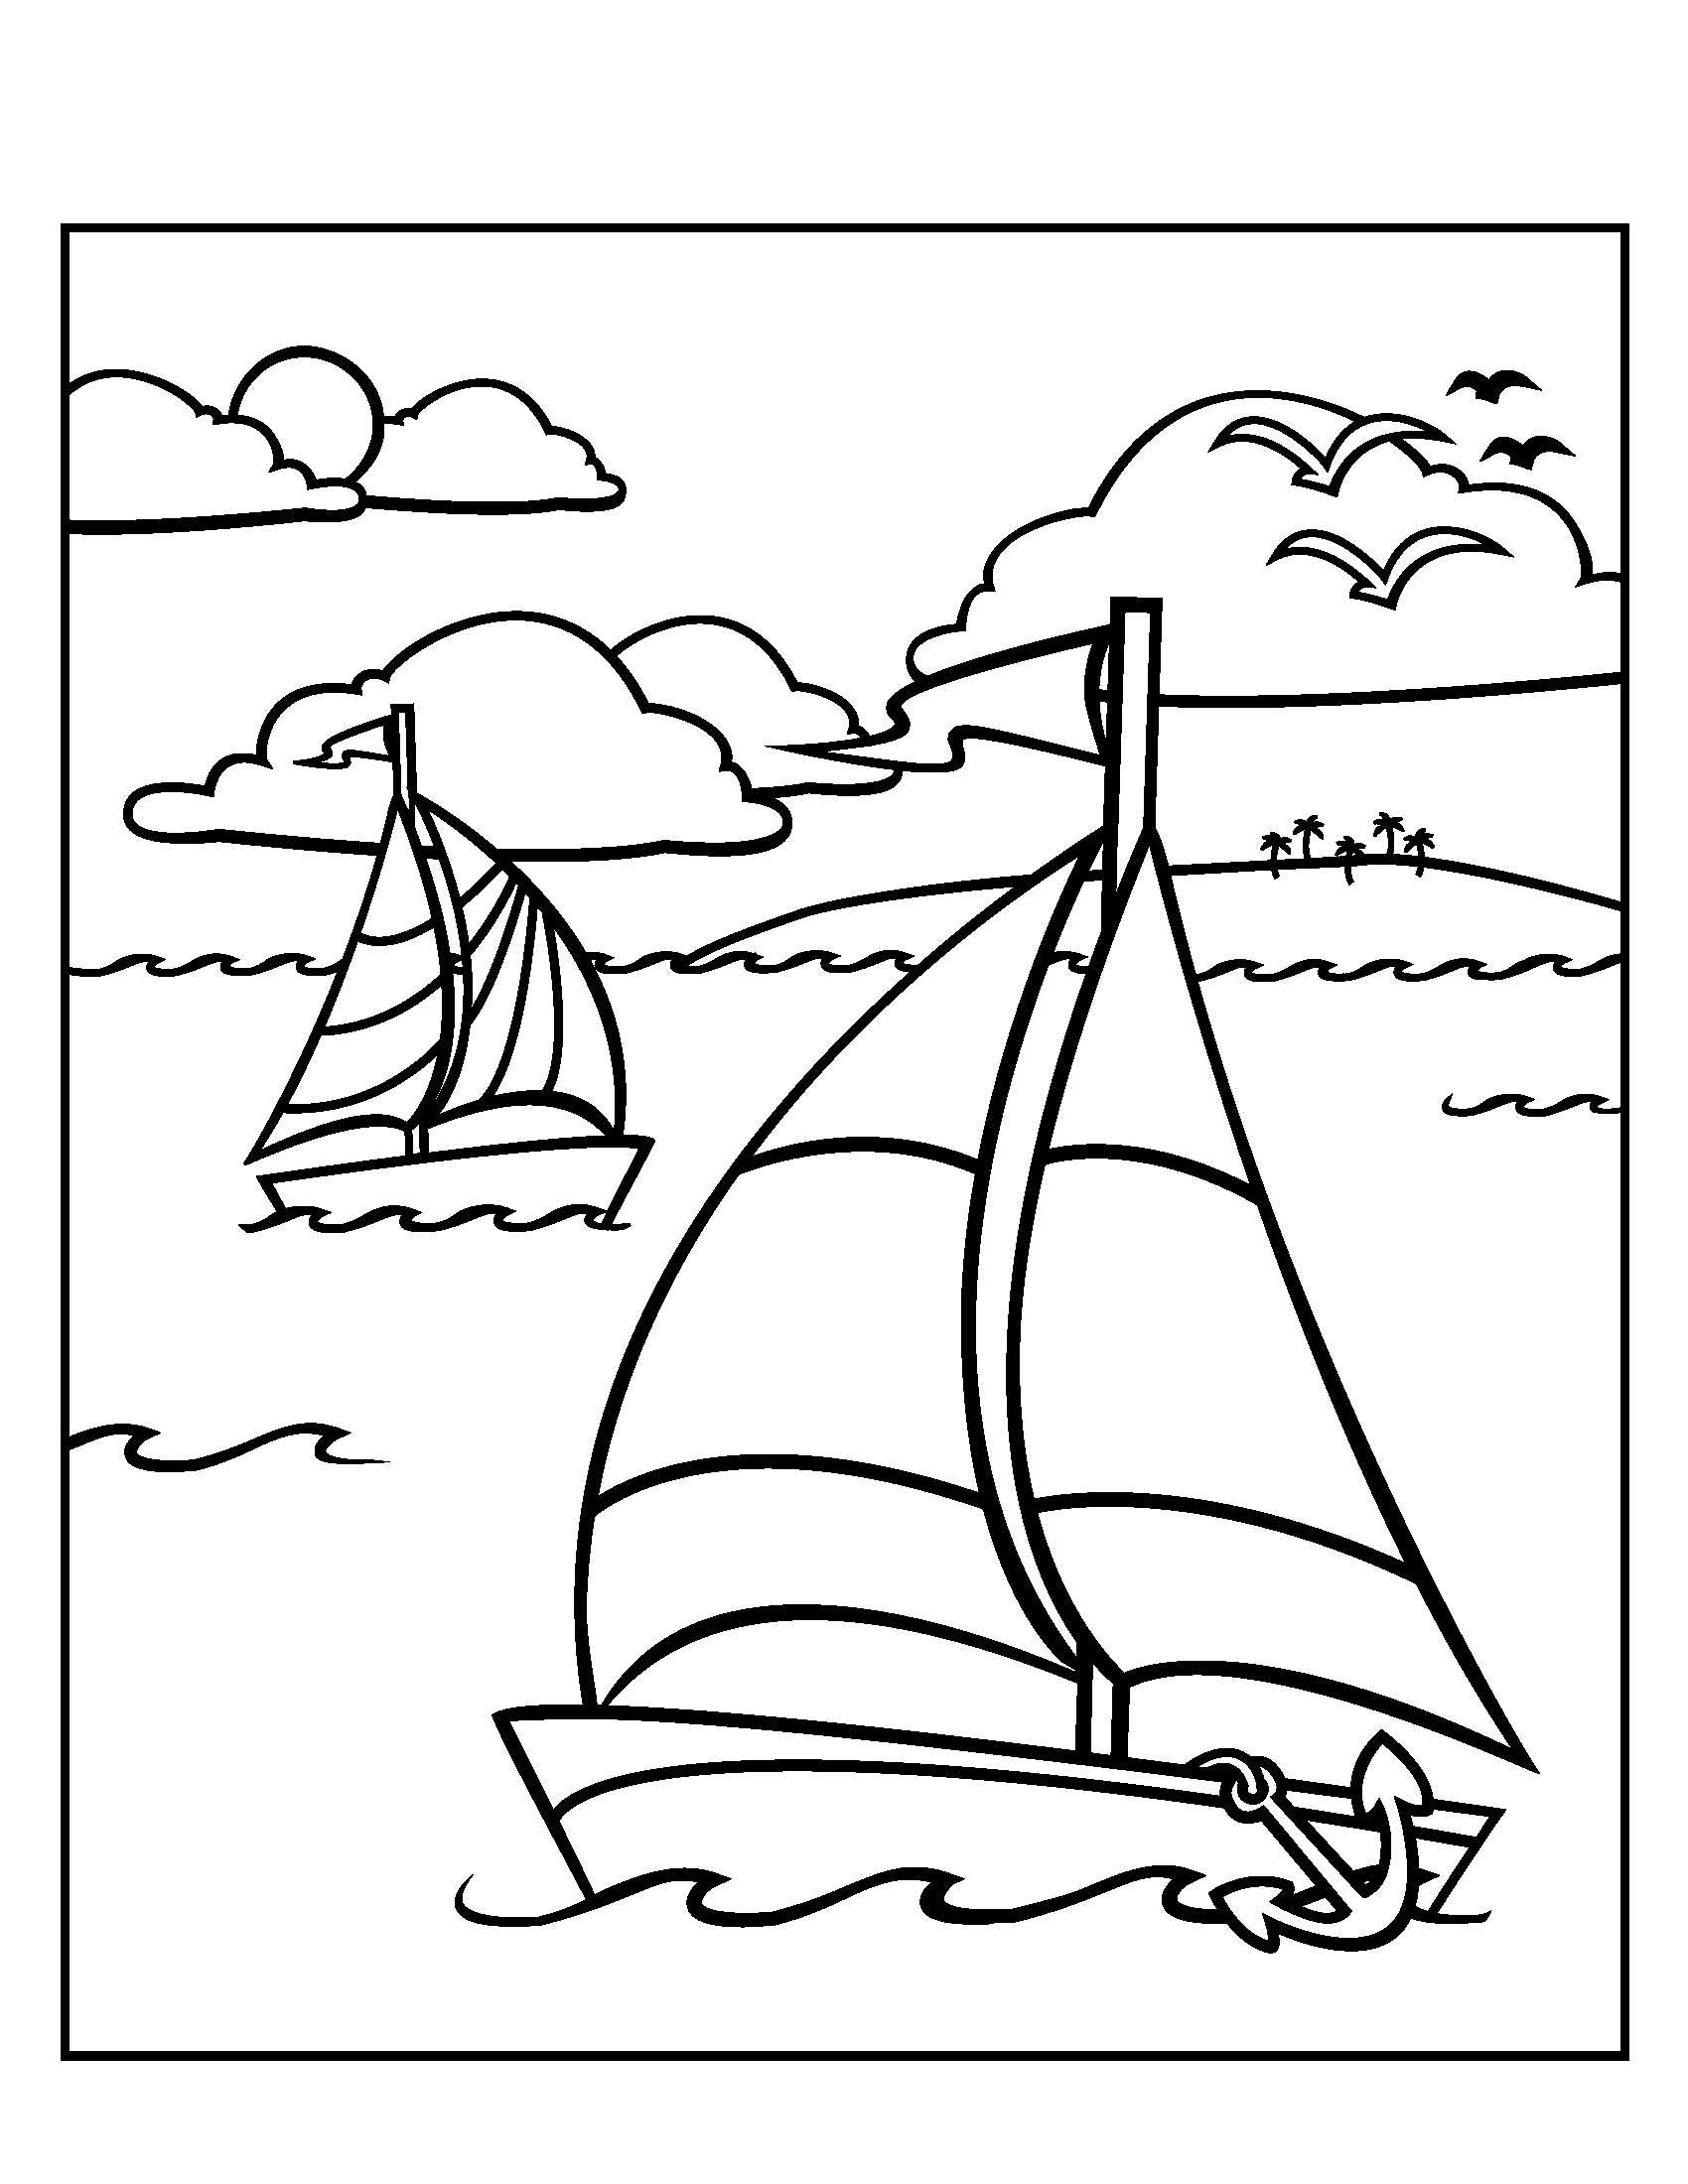 Elementary Coloring Pages at GetColorings.com | Free printable